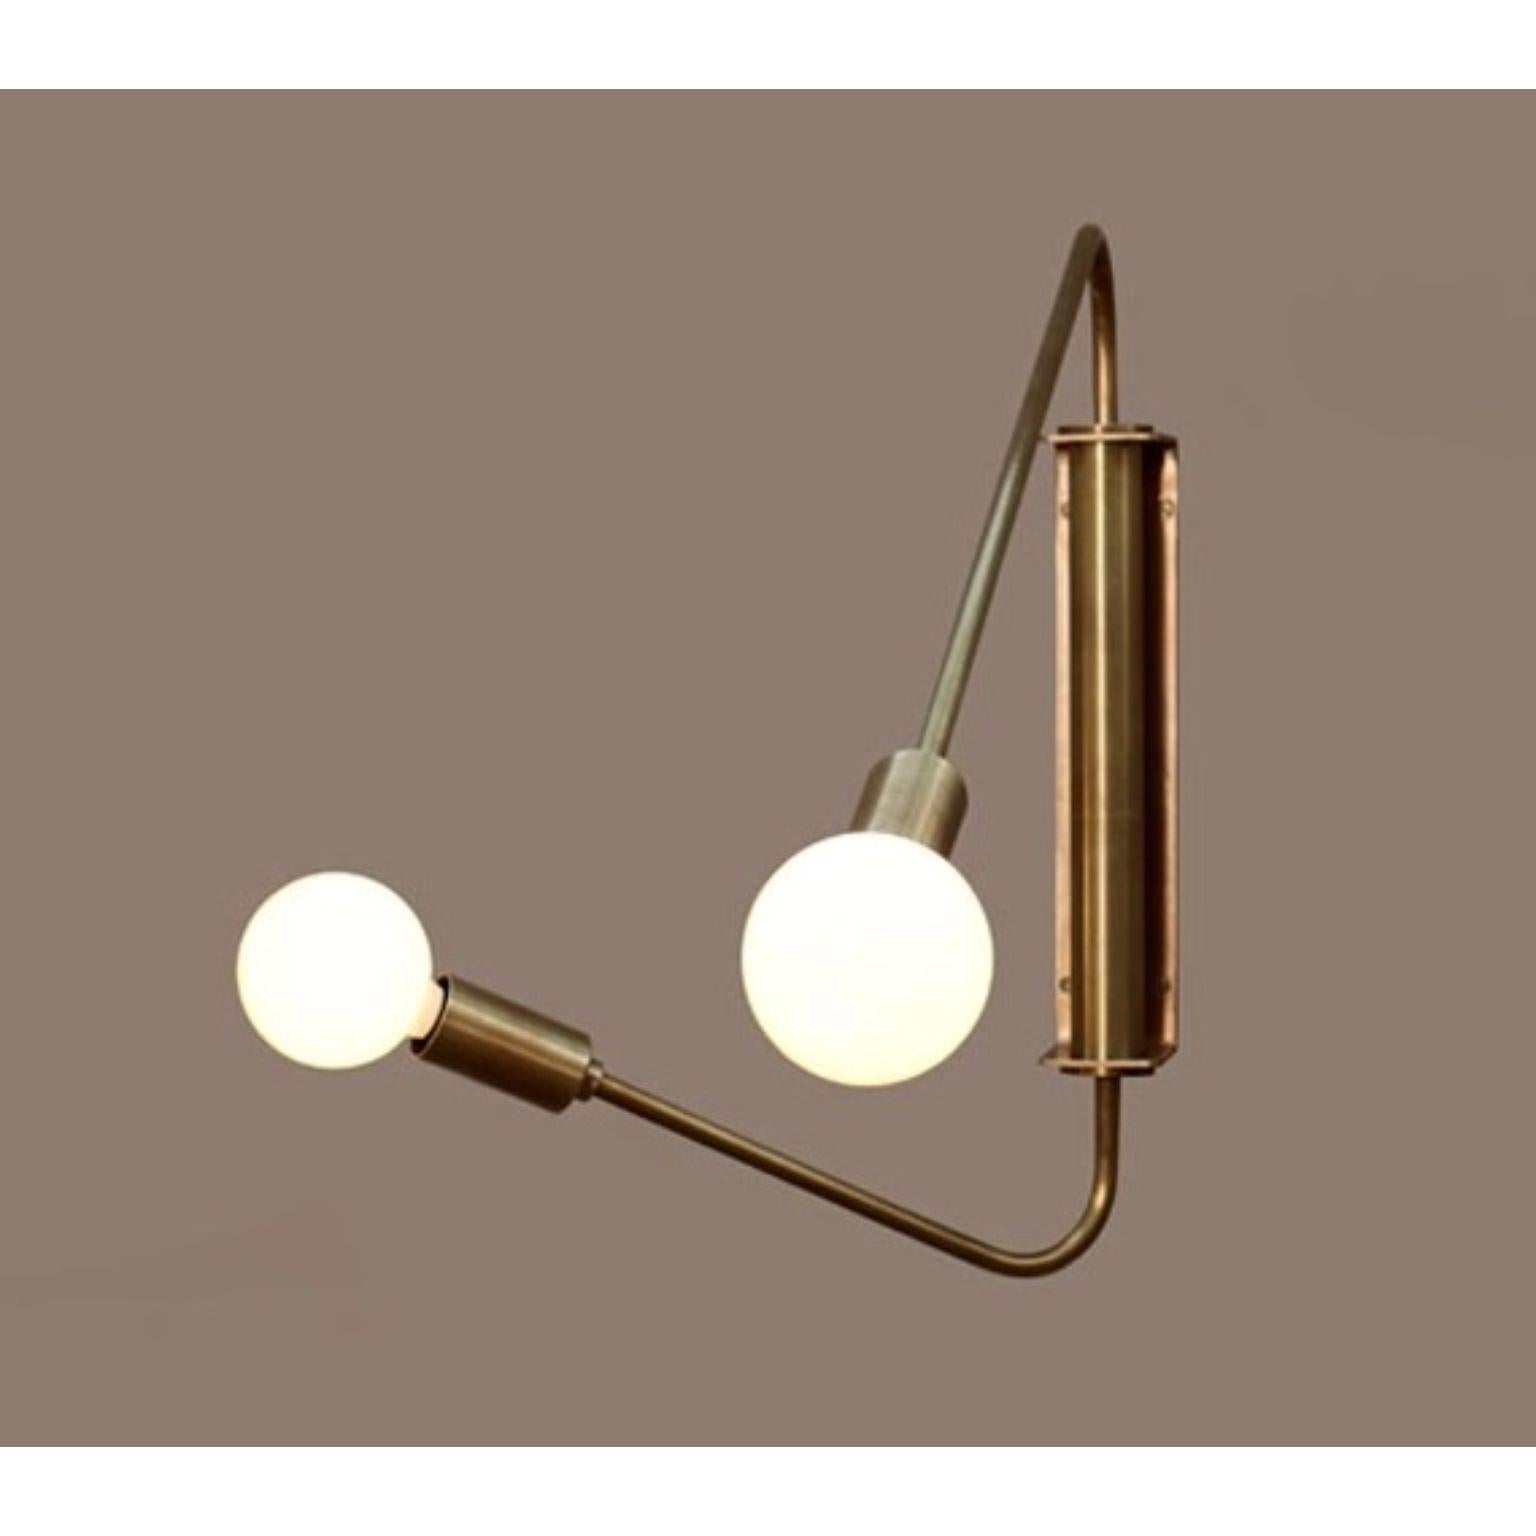 Float Two Arm Wall Sconce by Lamp Shaper
Dimensions: D 122 x W 84 x H 53.5 cm.
Materials: Brass.

Different finishes available: raw brass, aged brass, burnt brass and brushed brass Please contact us.

All our lamps can be wired according to each